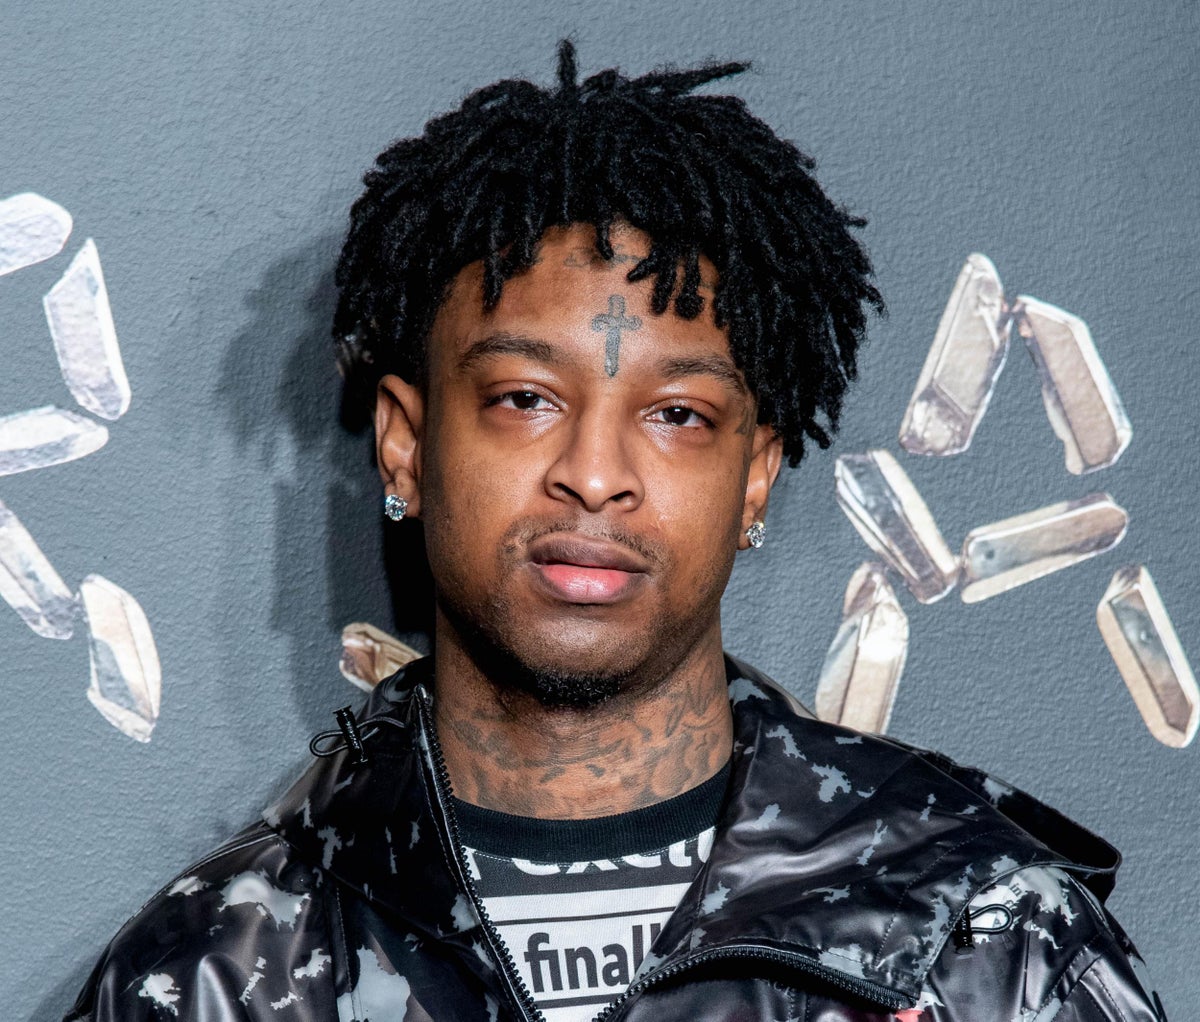 Download 21 Savage Arrest Everything We Know After Rapper Detained By Ice The Independent The Independent